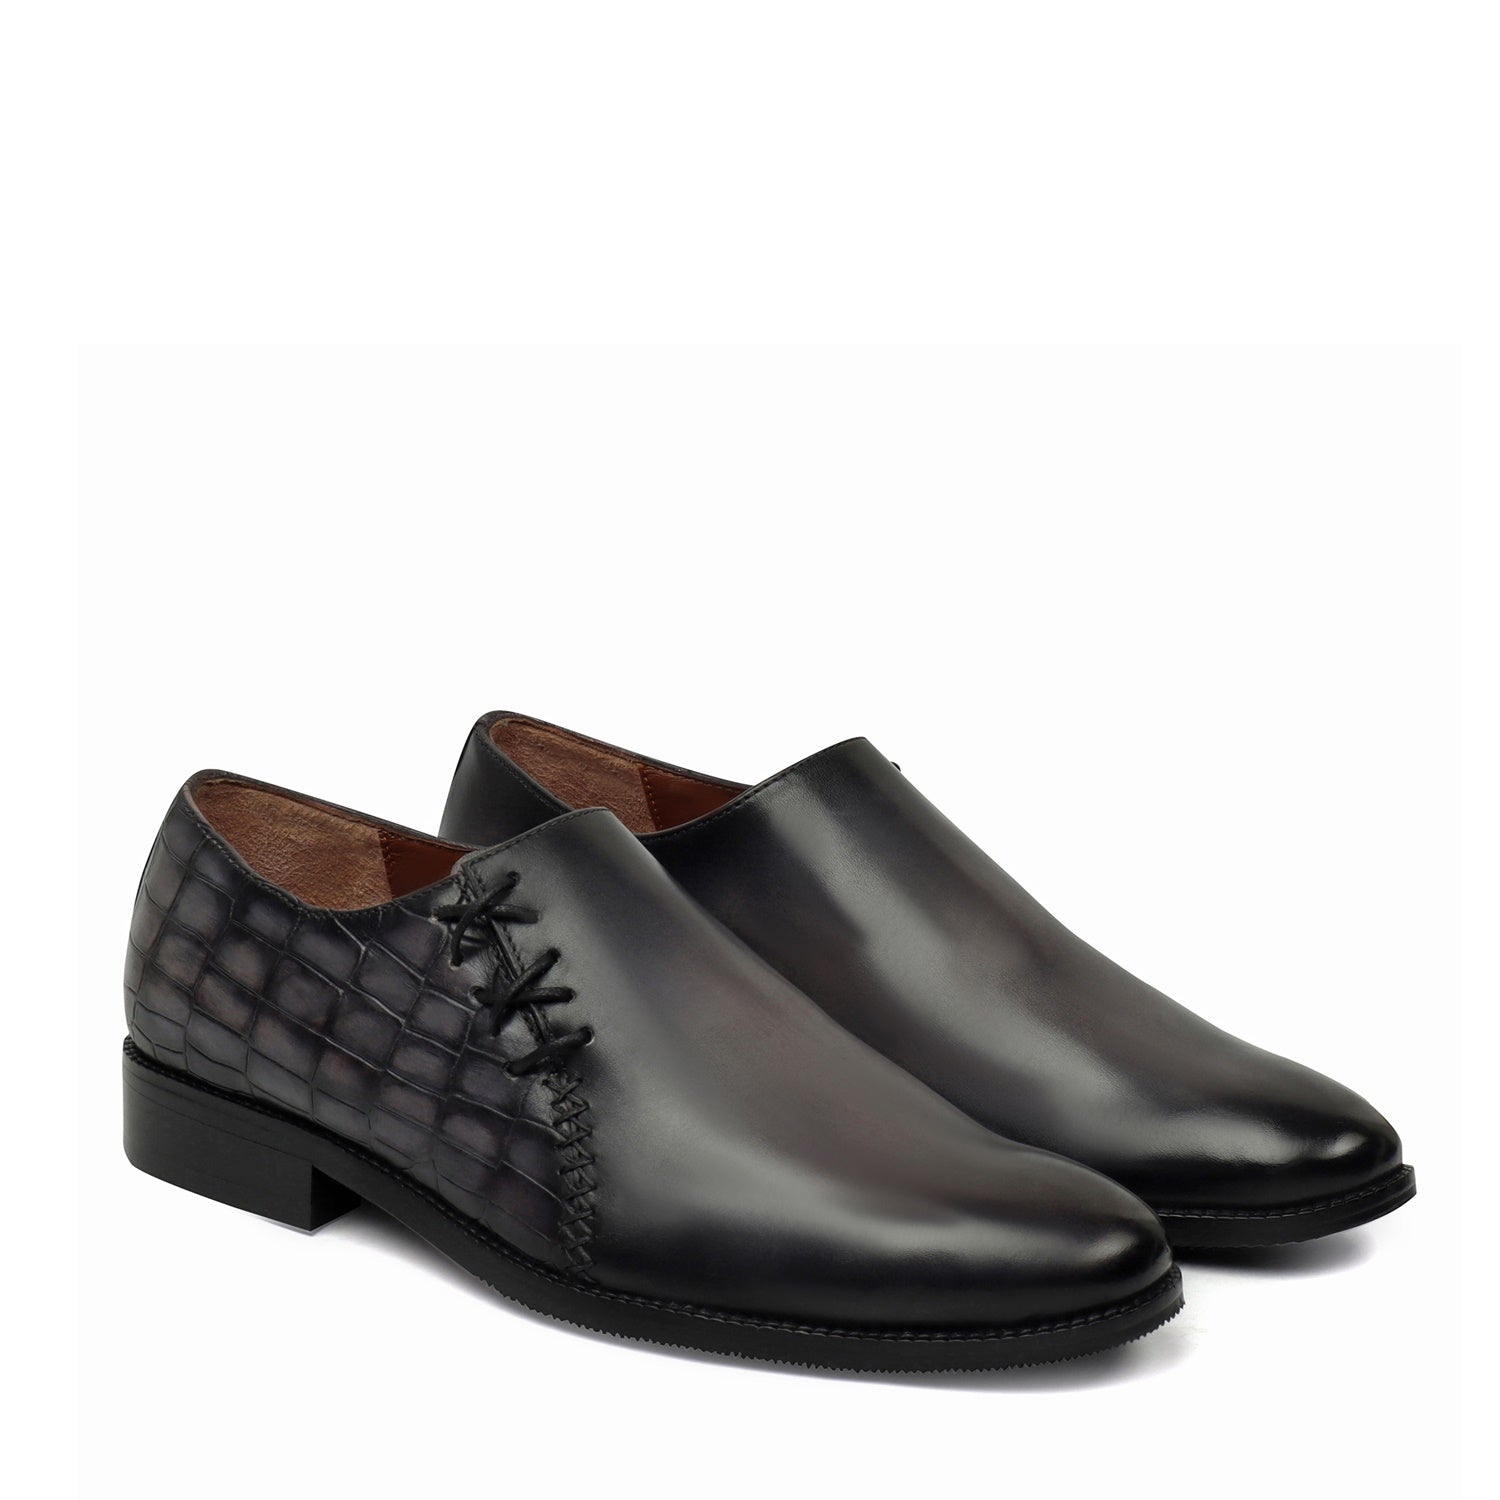 Grey Cross Stitched Side Lacing with Quarter Deep Cut Croco Leather Formal Shoes by Brune & Bareskin